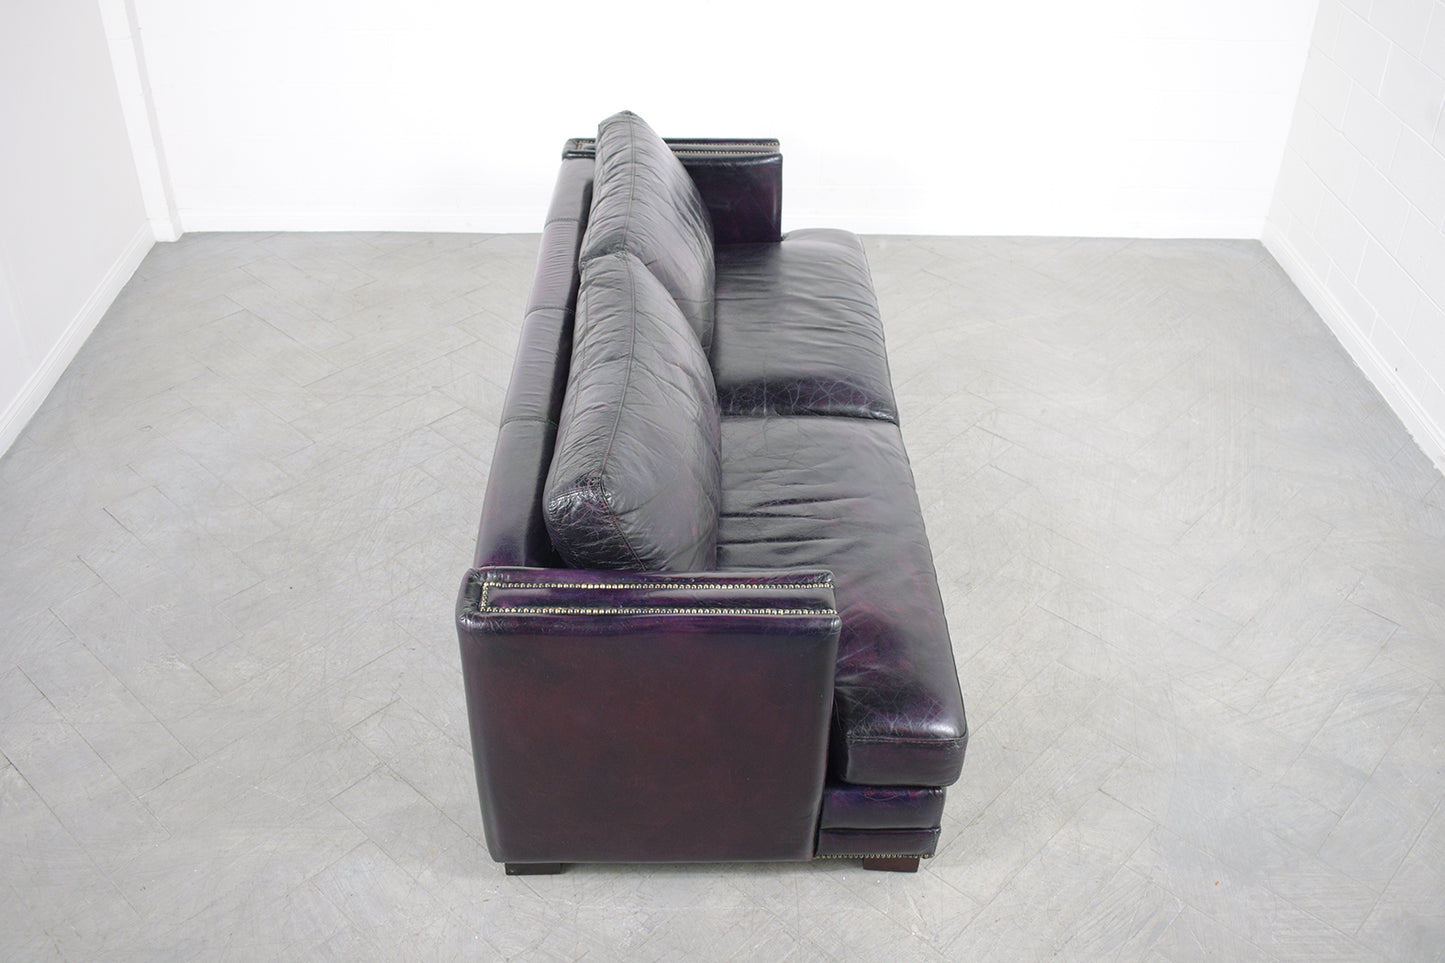 Modern Two Seat Blue Leather Sofa